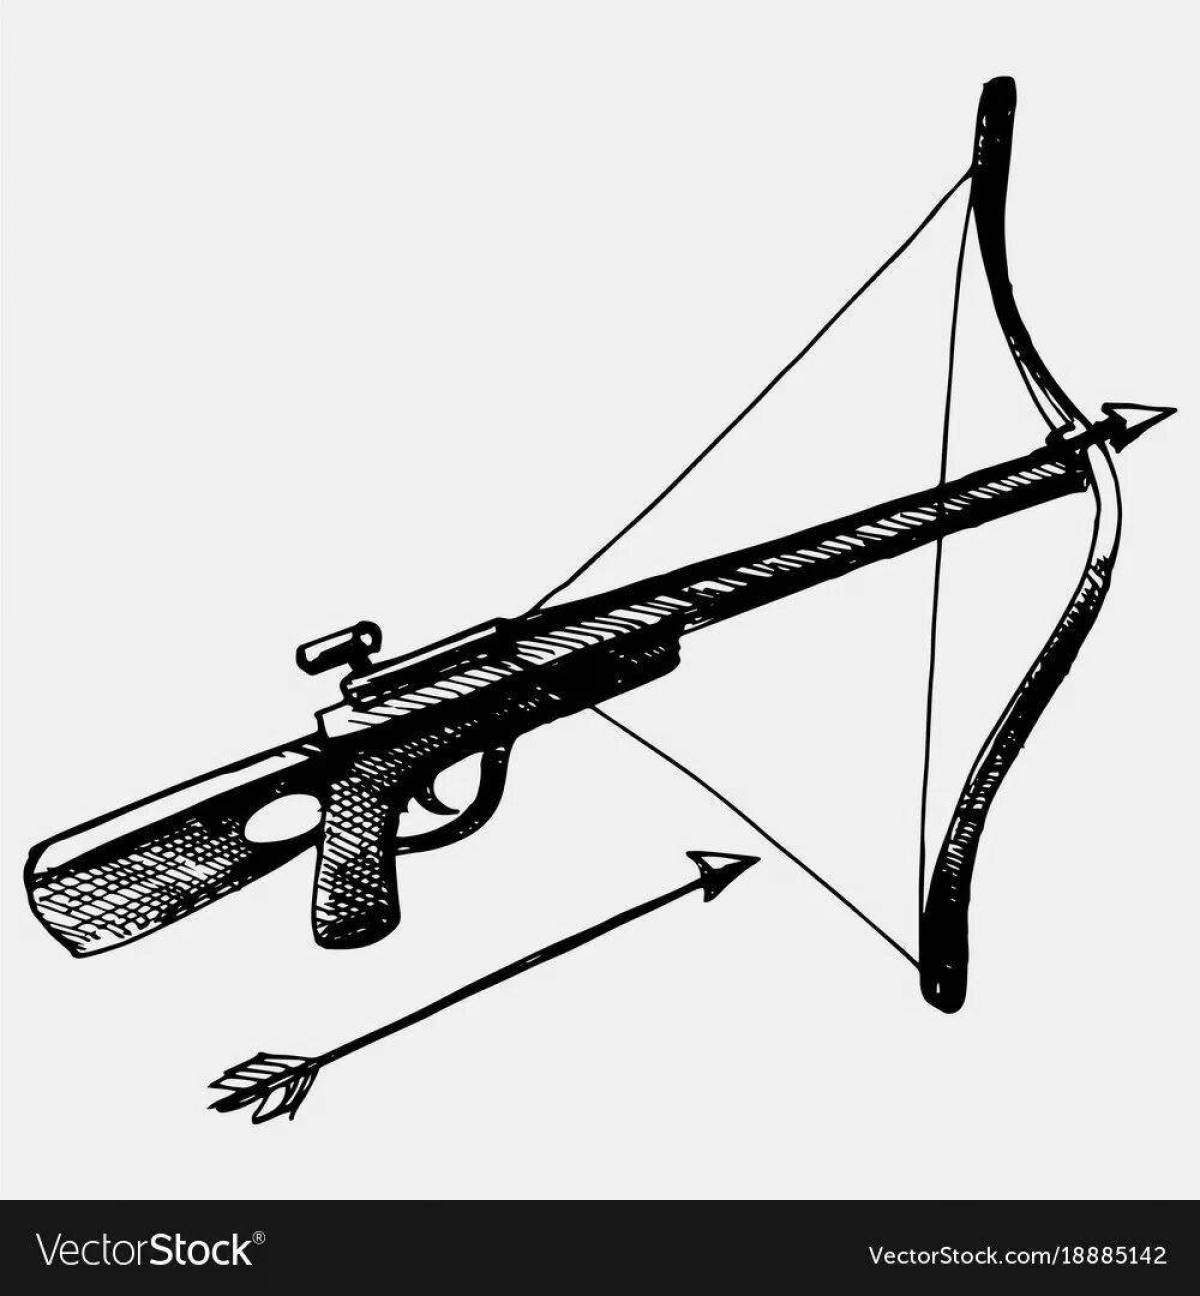 Charming crossbow coloring page